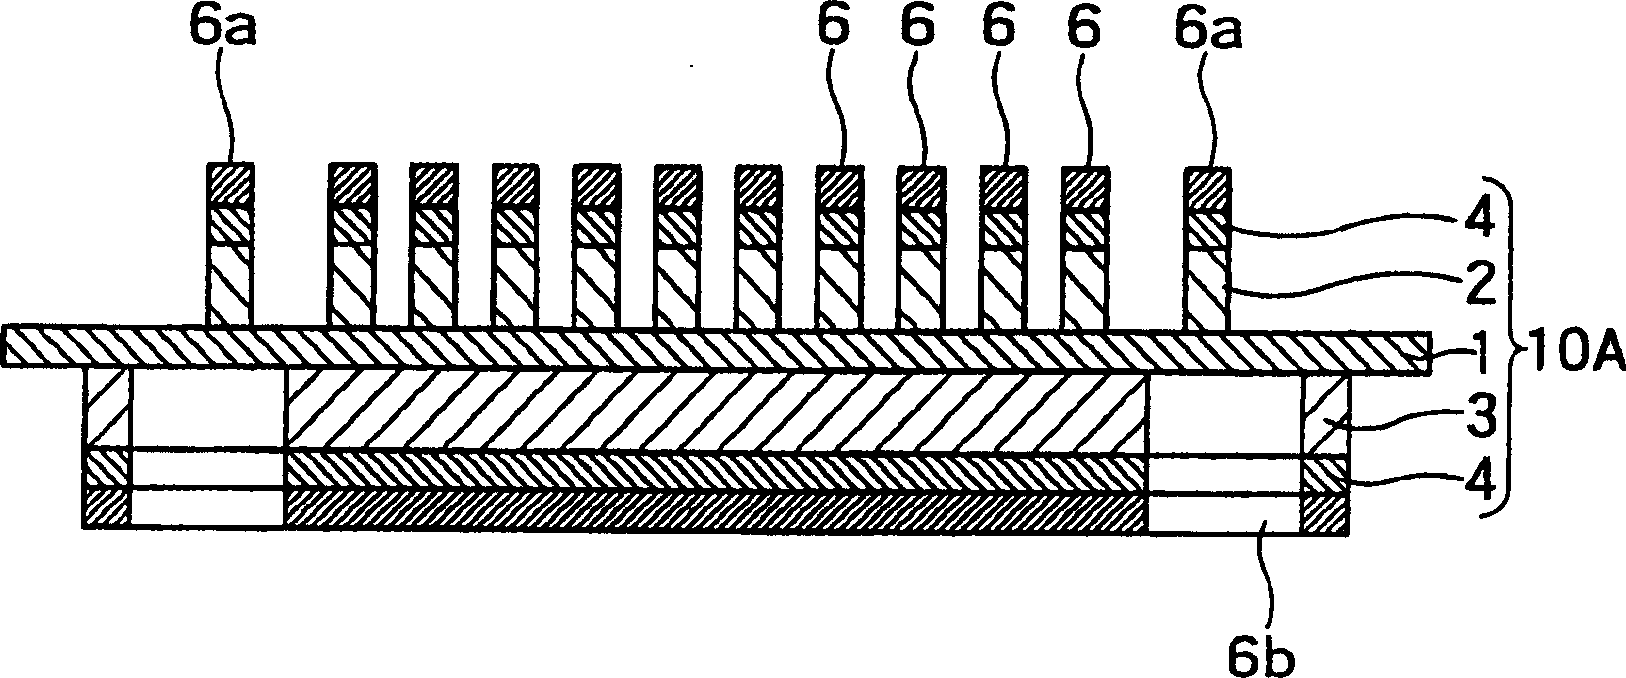 Flexible circuit substrate